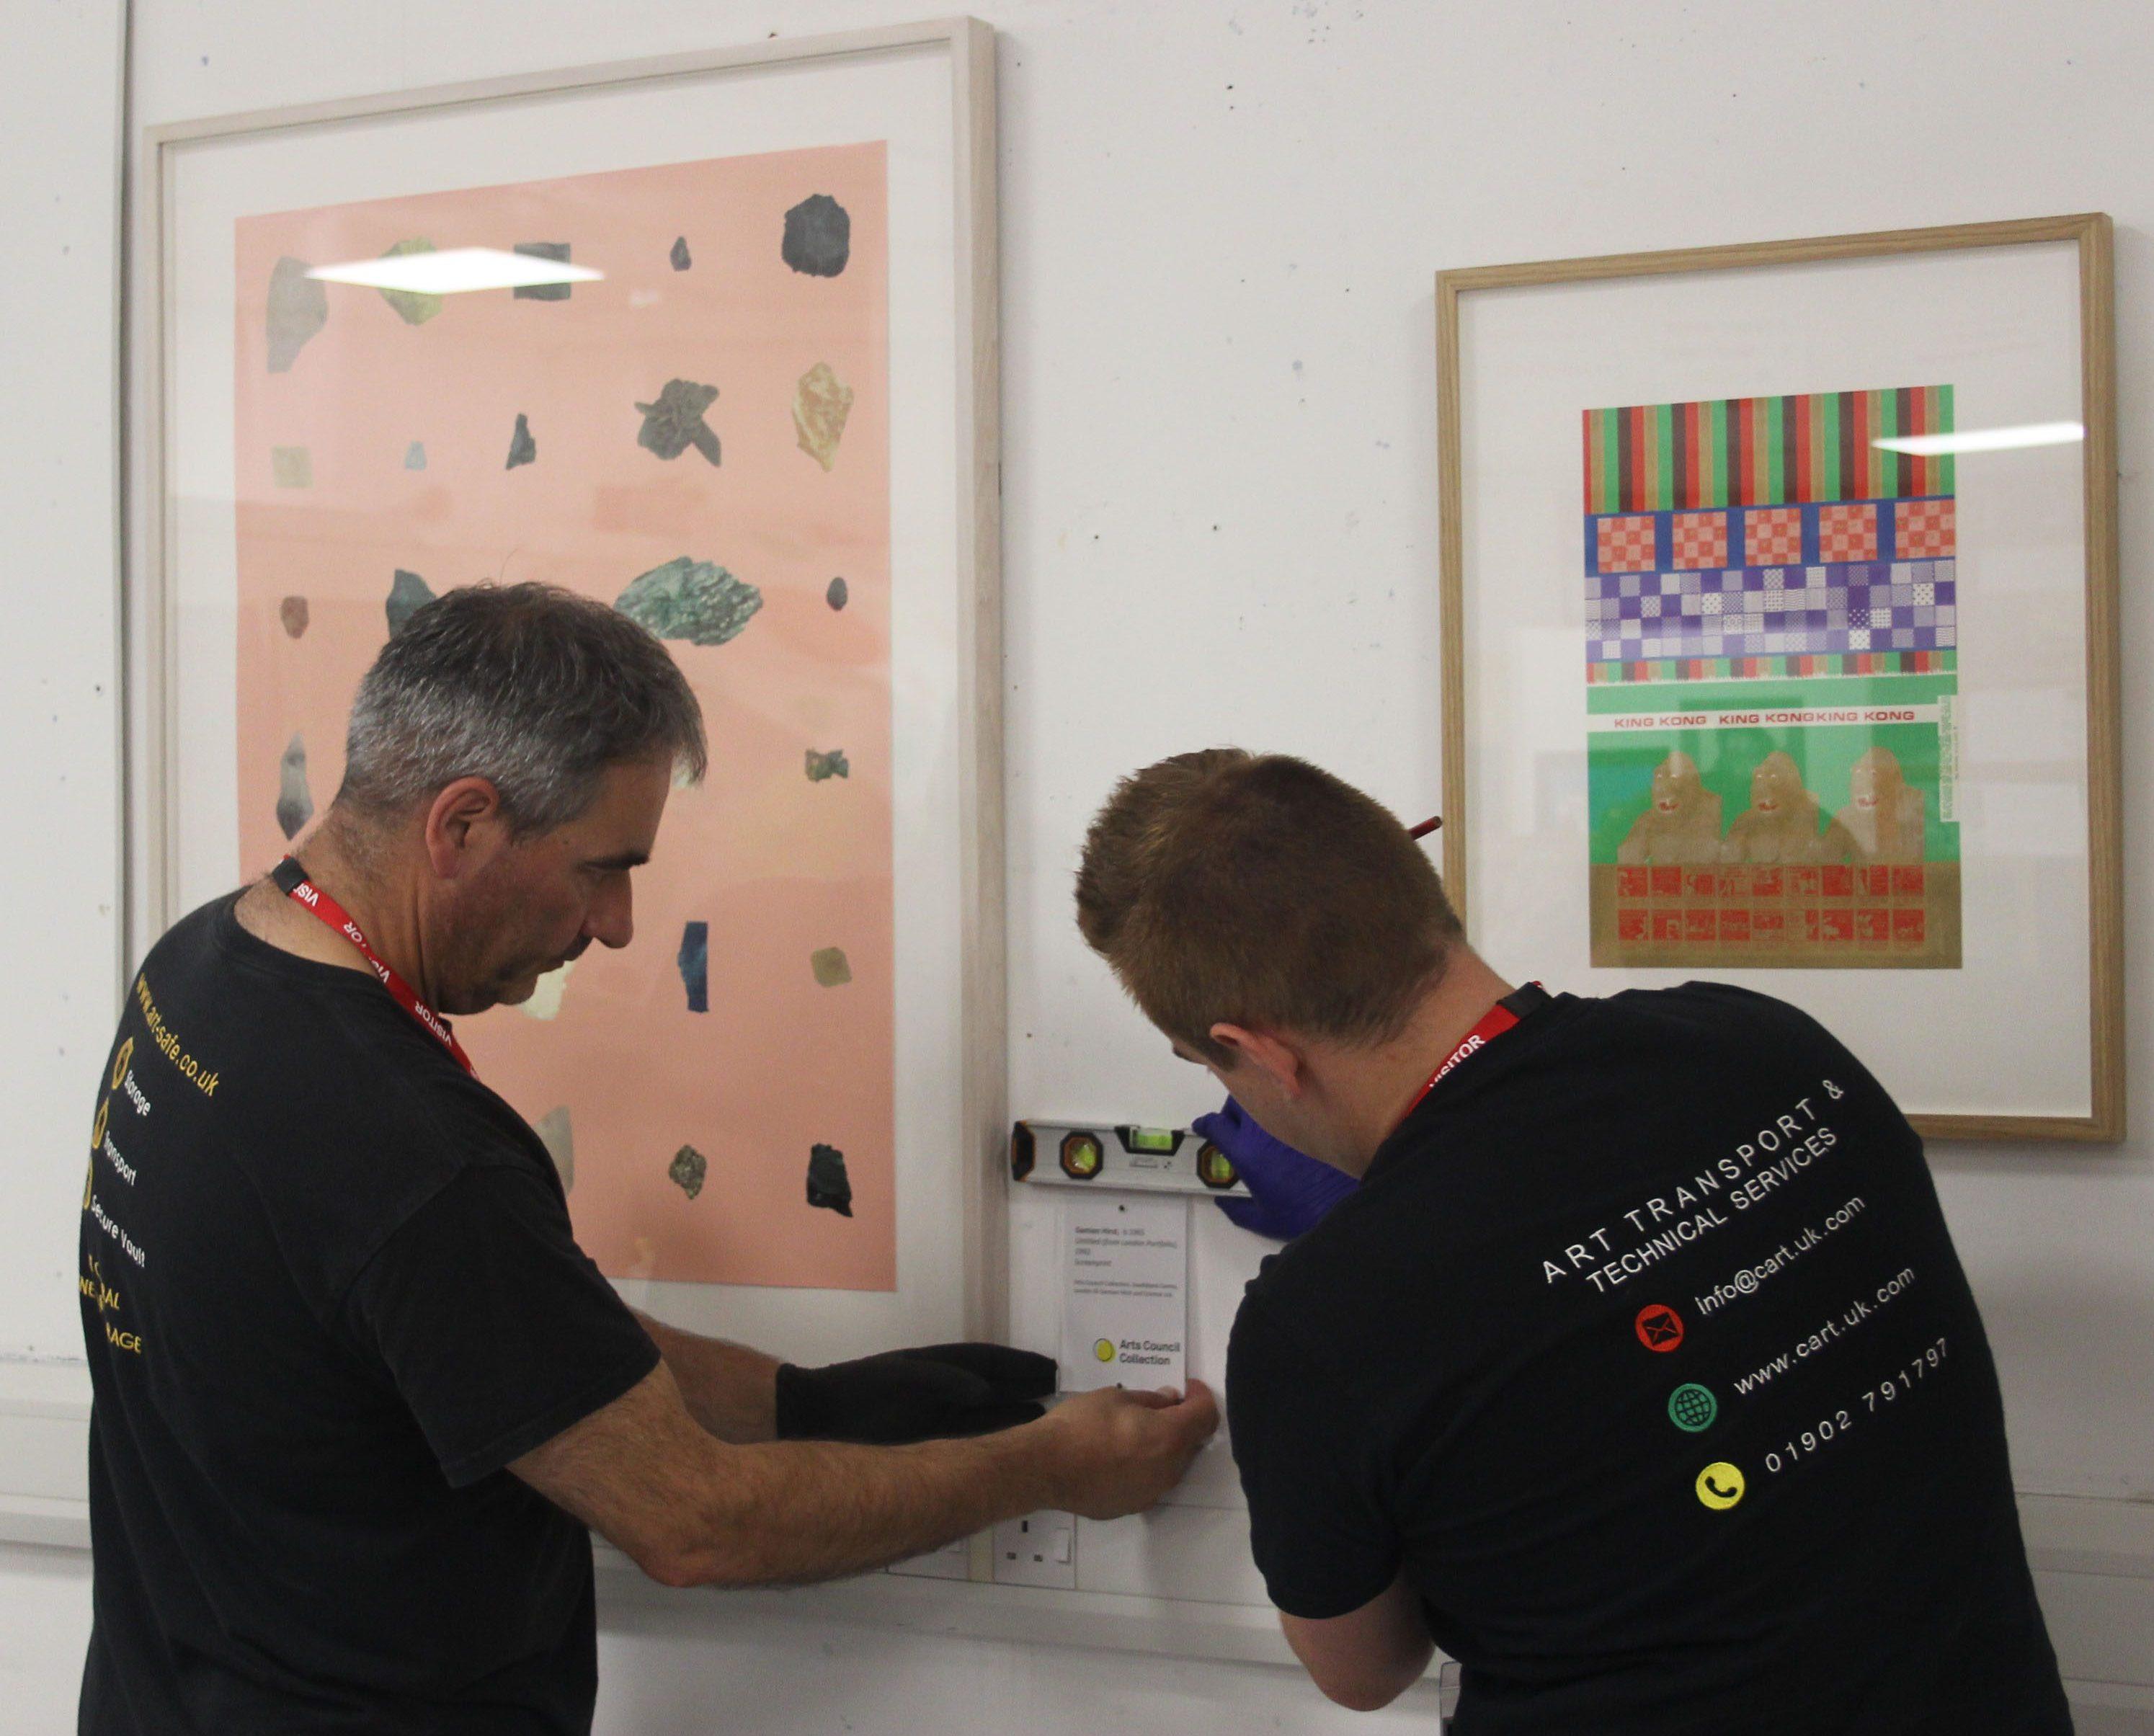 Arts Council installing the exhibition